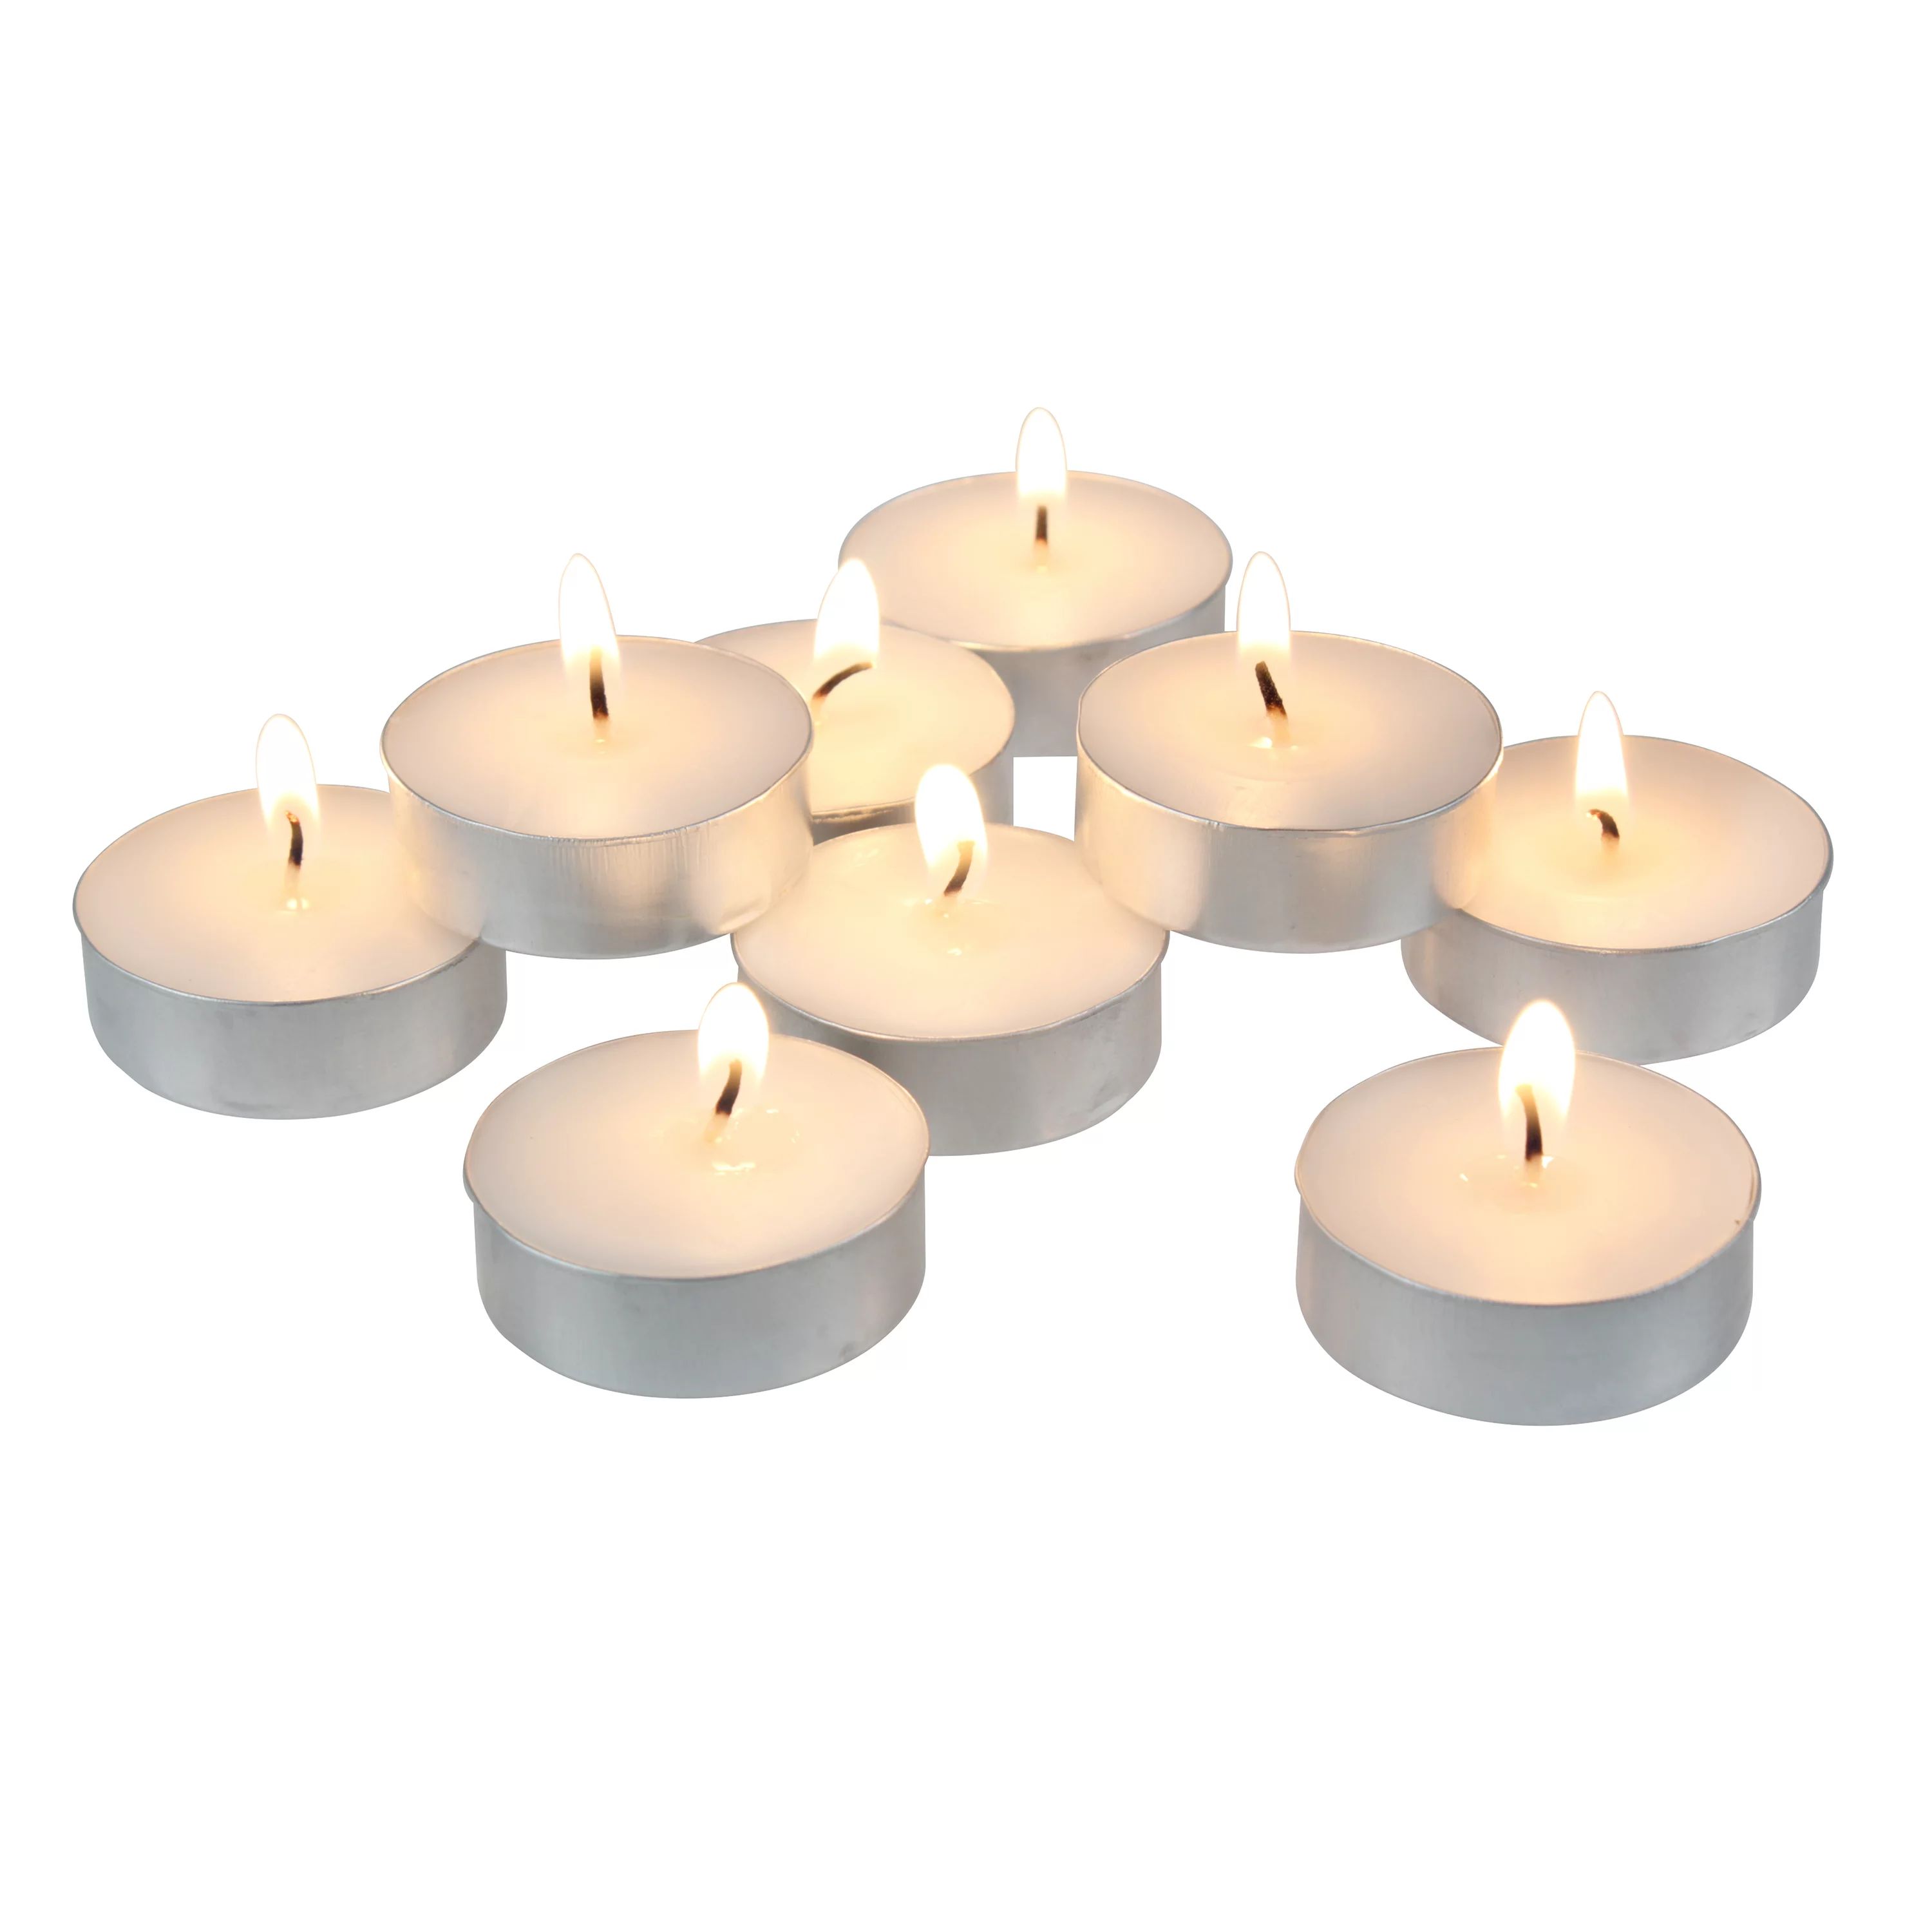 Stonebriar Citronella Scented Tea Light Candles with 4 Hour Burn Time, 20 Pack, Off-white | Walmart (US)